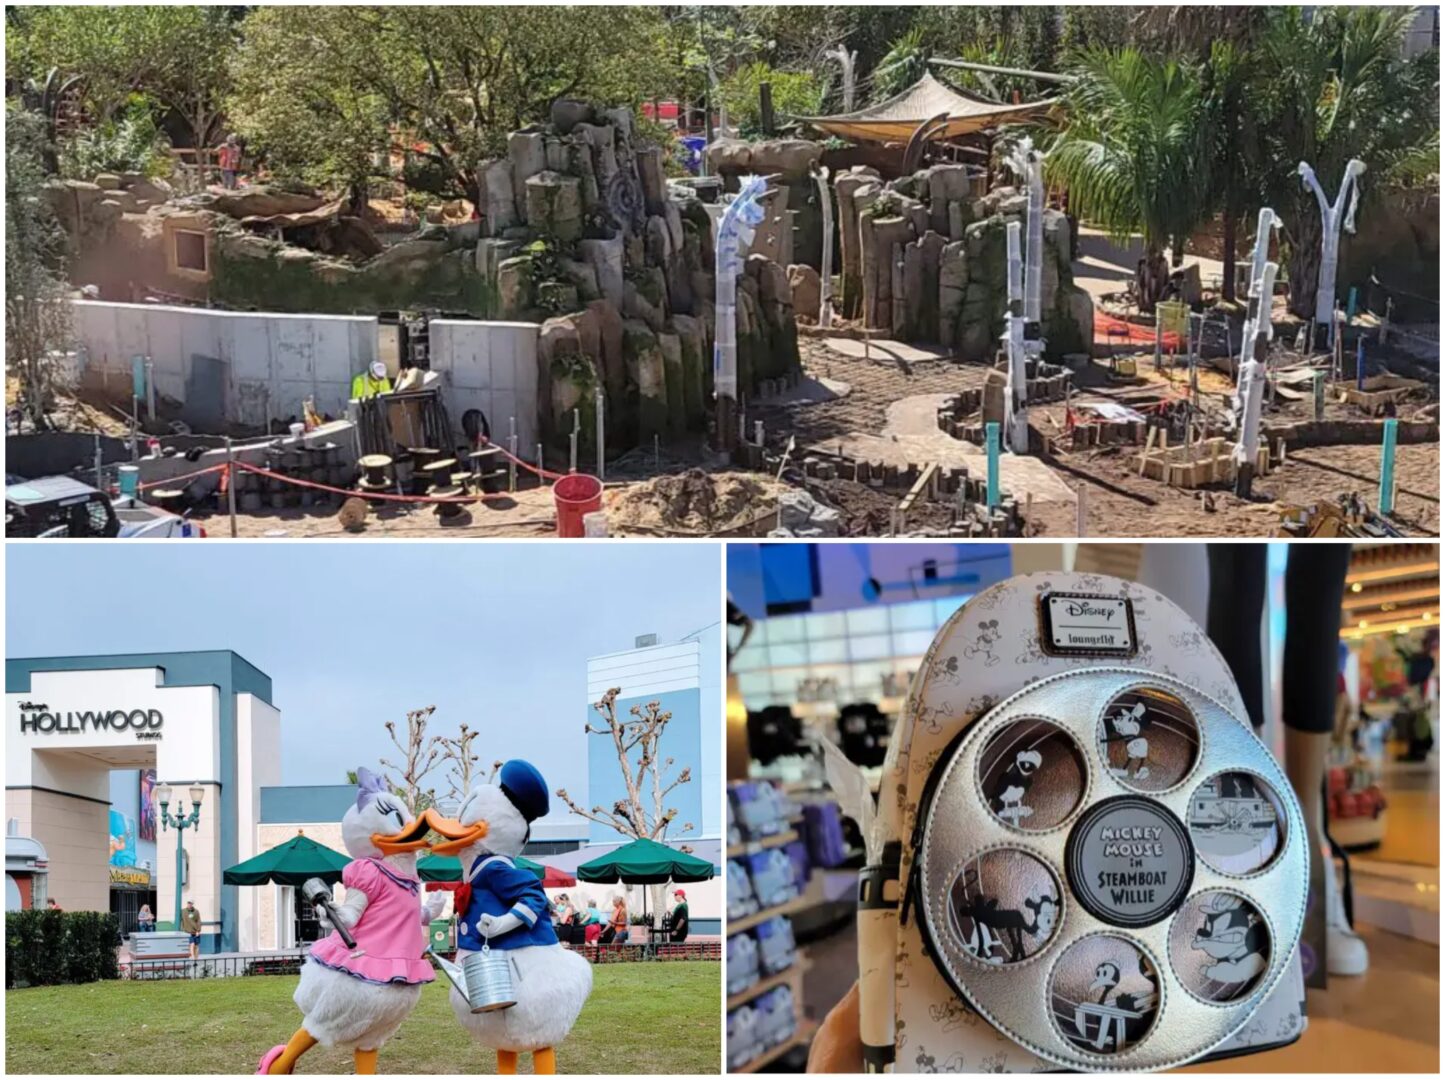 Disney News Highlights: Journey of Water Updates, Spring is in the Air, Magic “Did Not” Happen Parade Canceled again